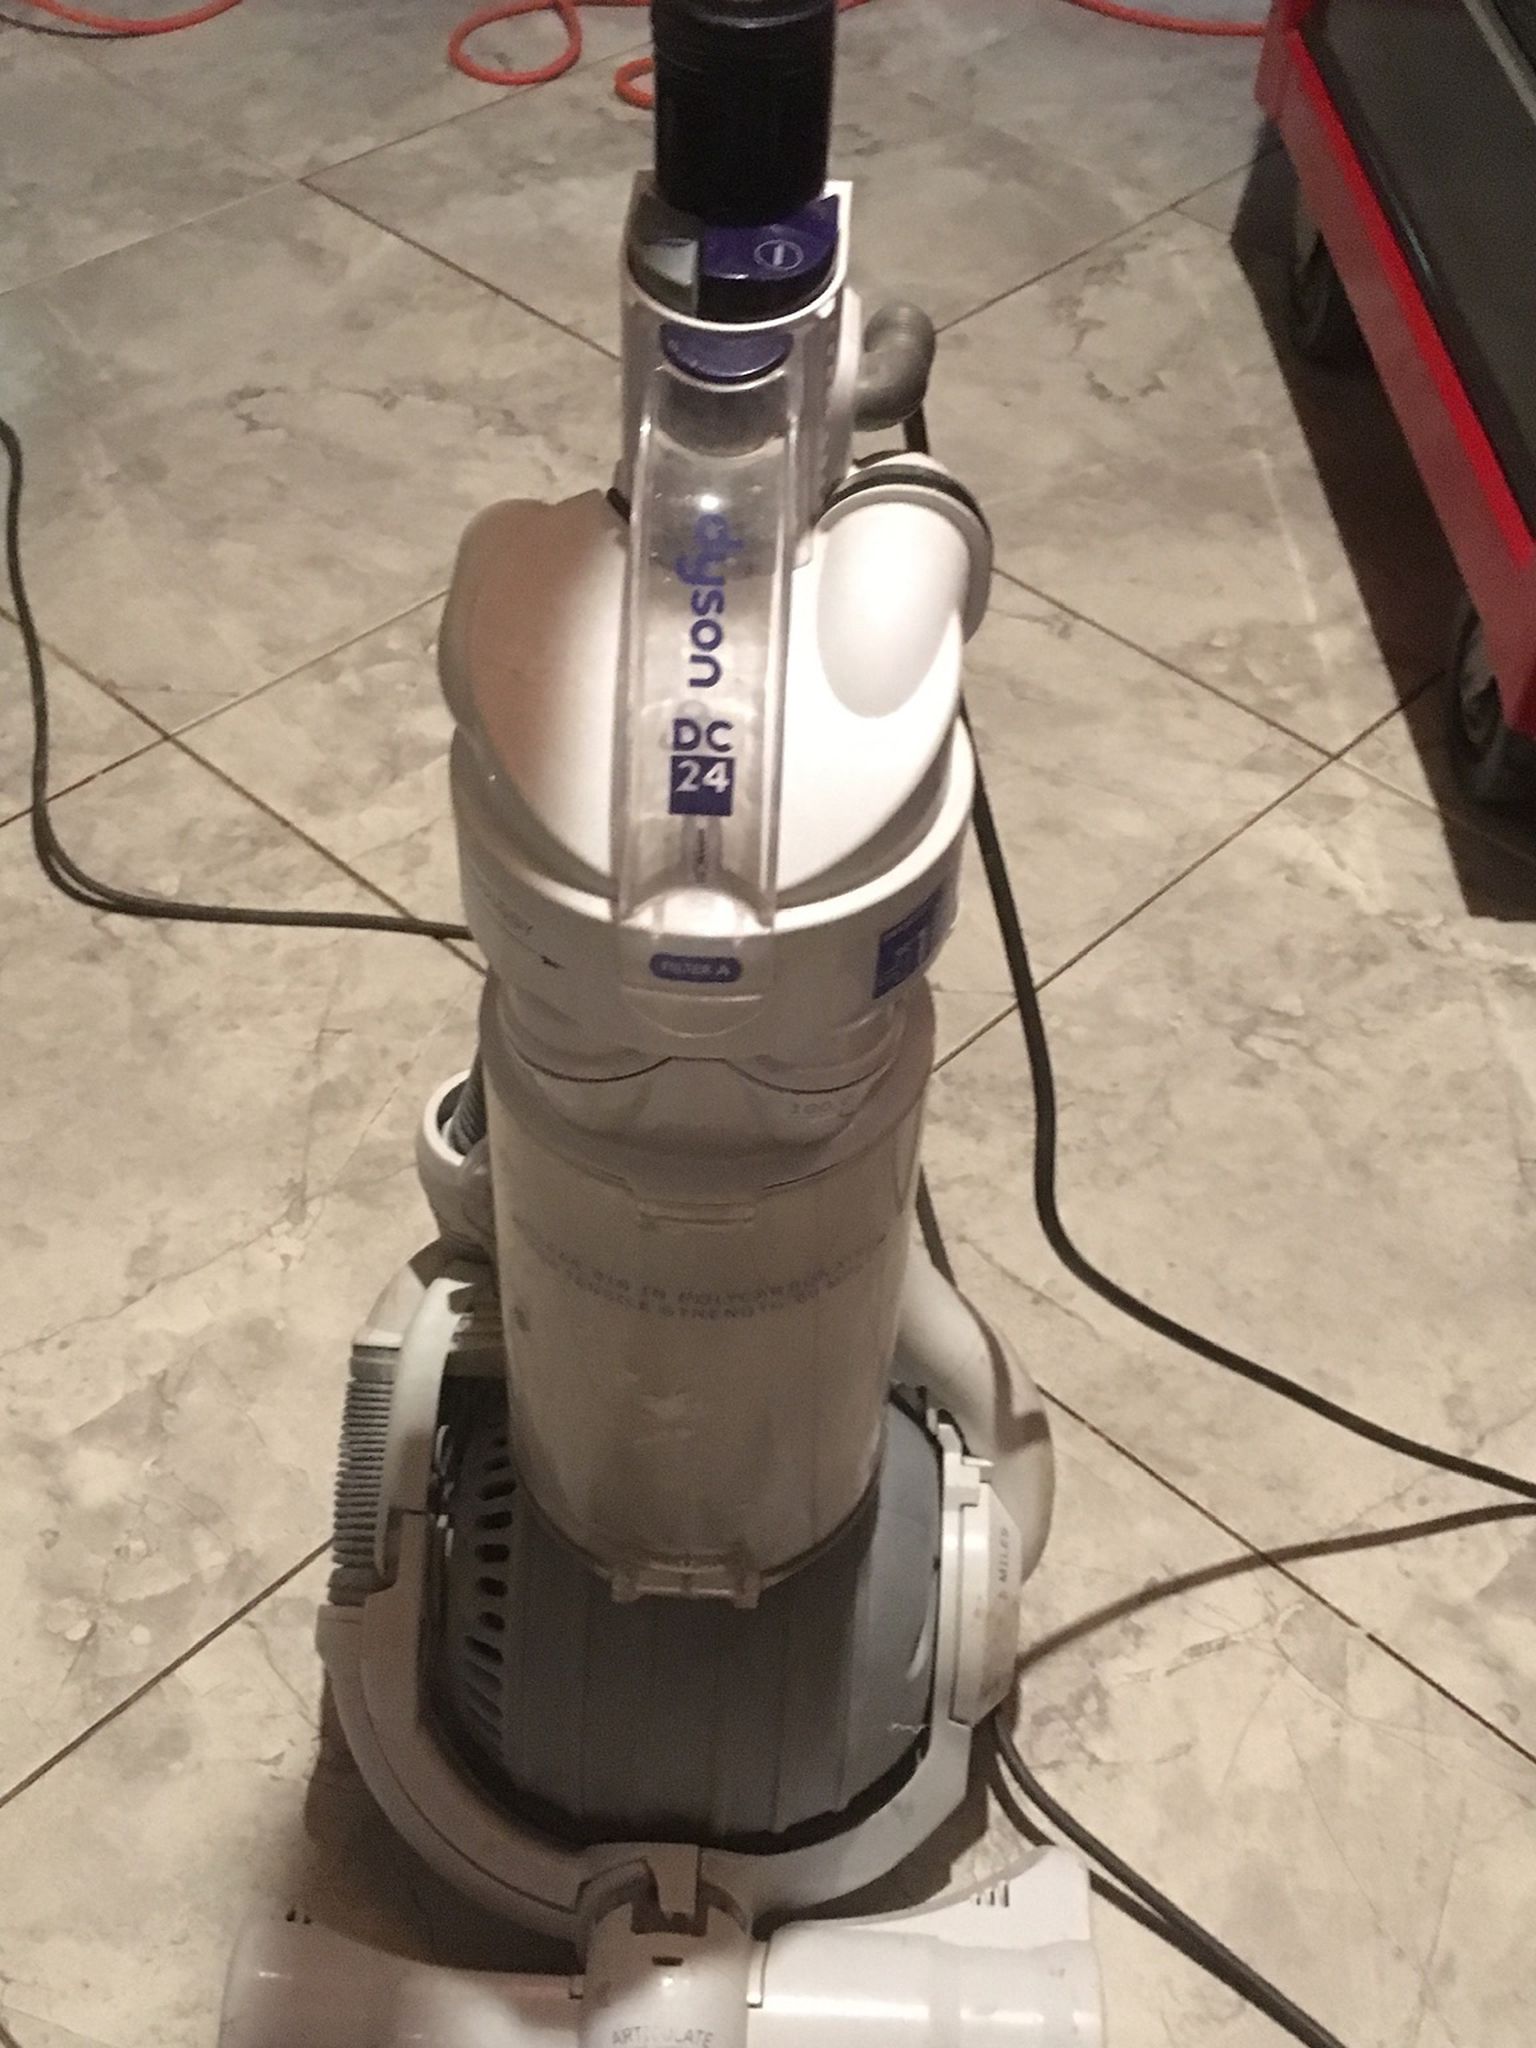 DYSON VACUUM NOT WORKING PERFECTLY